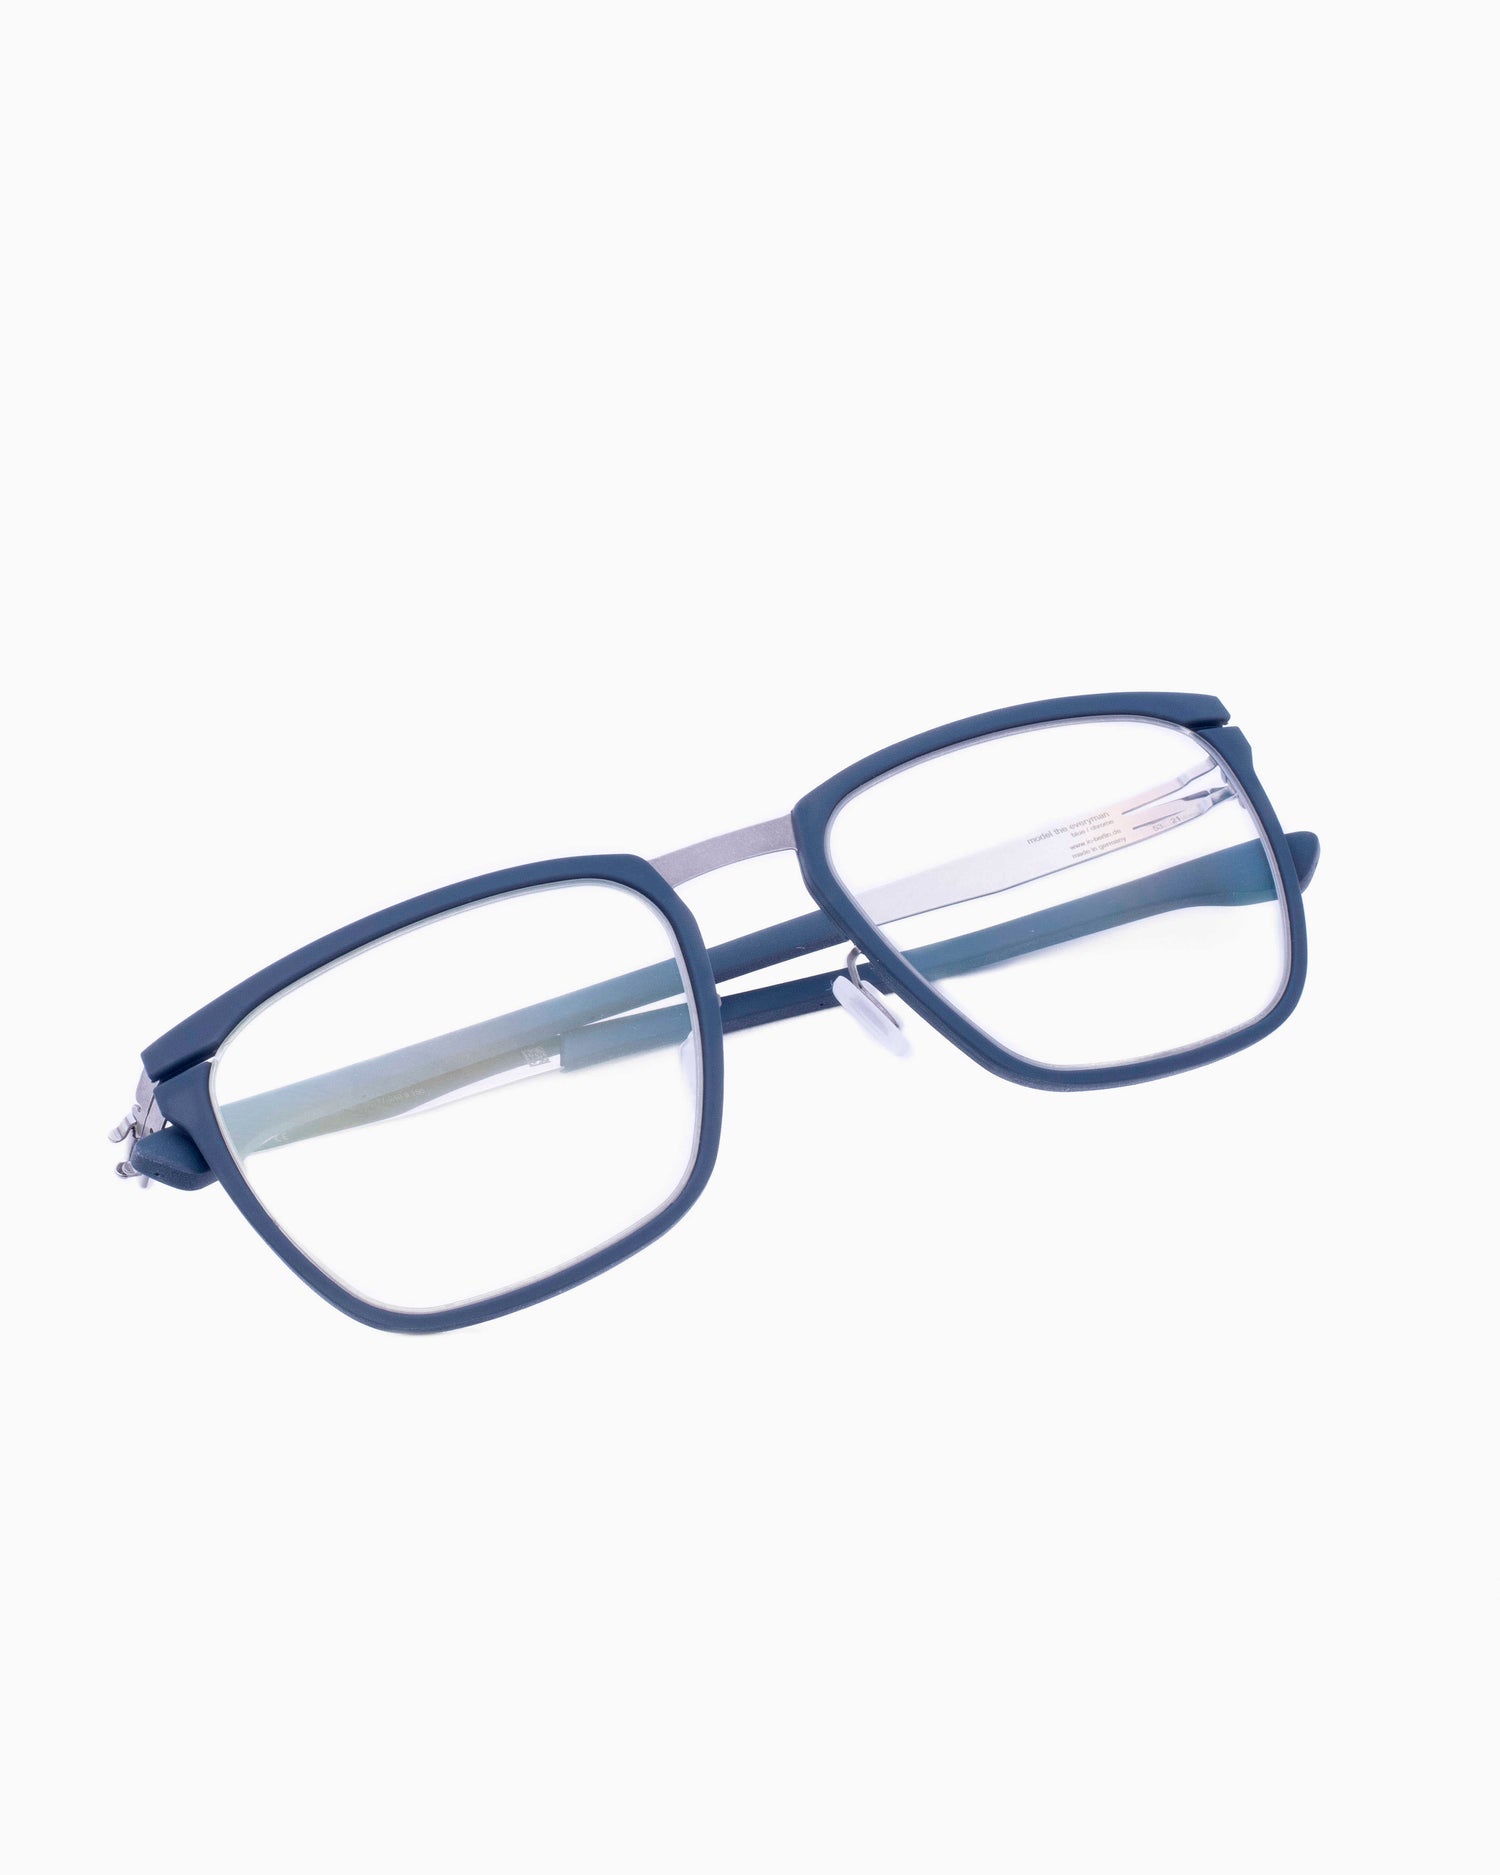 Ic Berlin - theeveryman - chrome-blue | glasses bar:  Marie-Sophie Dion